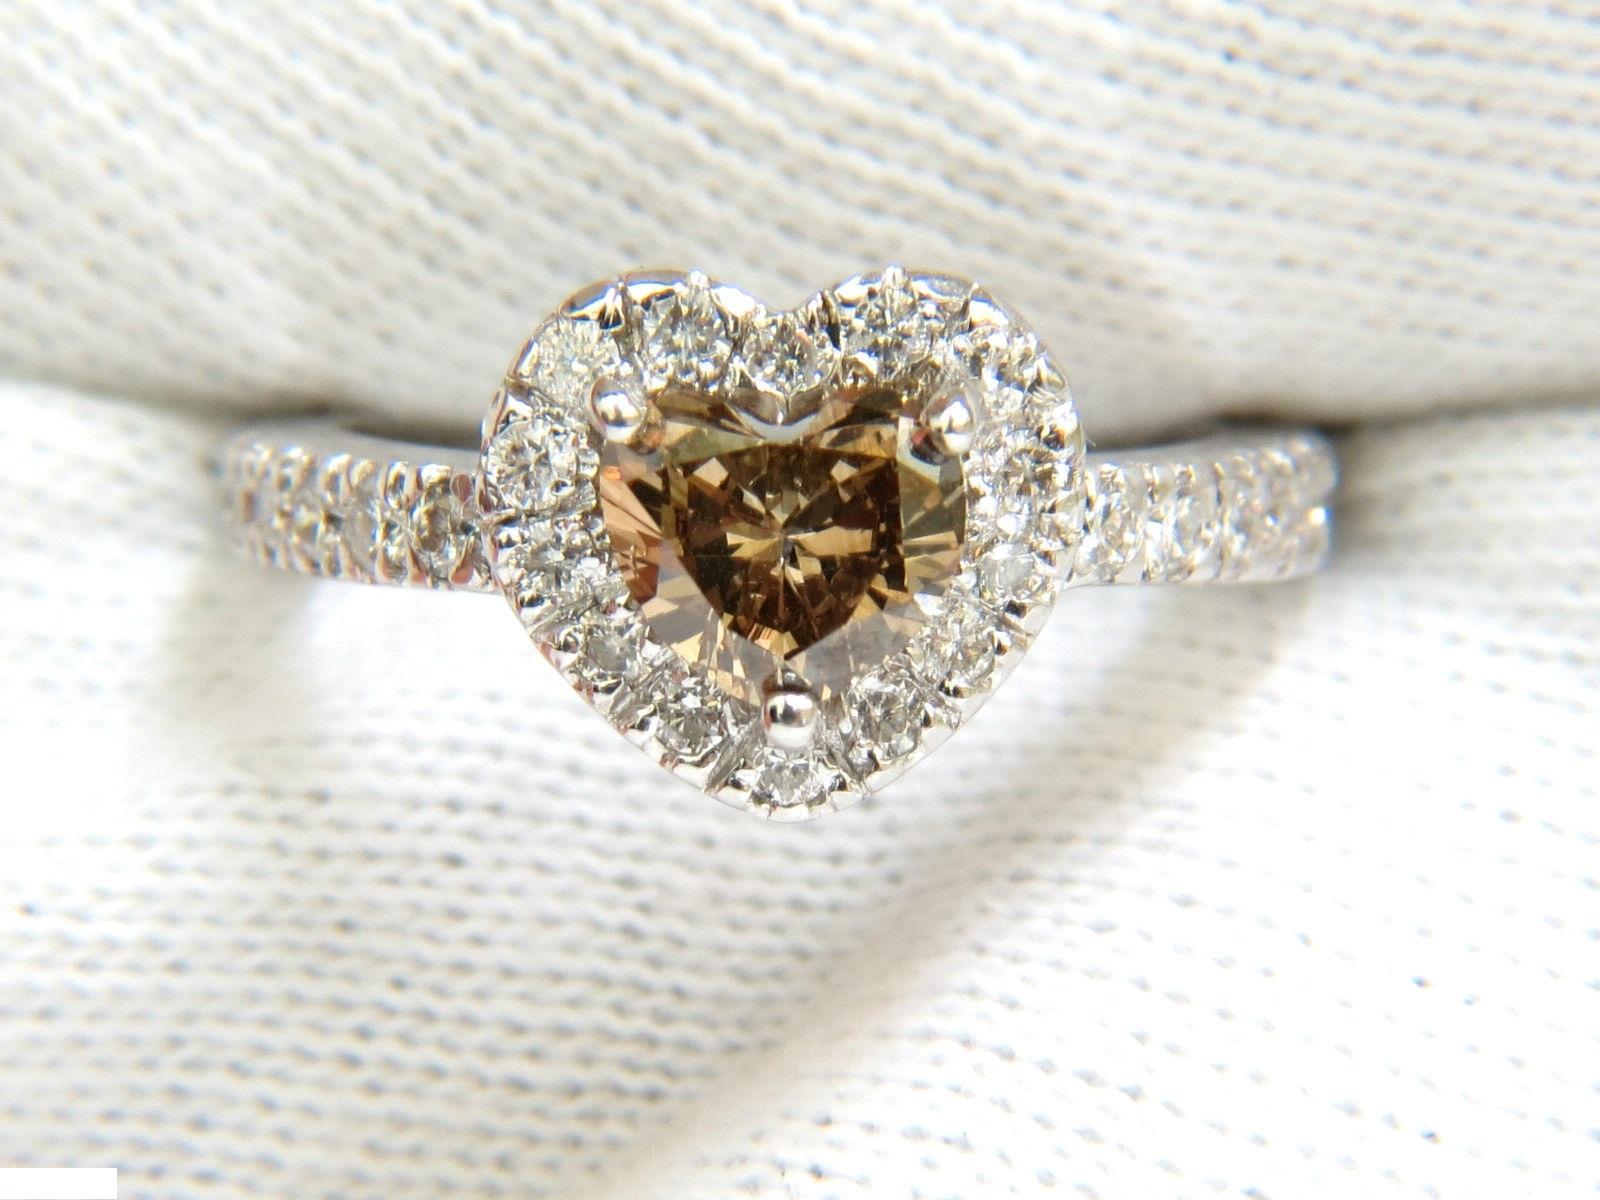 .82ct. Natural Fancy Brown diamond

Heart shape,  full cut.

Vs-2 clarity.



Side diamonds:

.55ct. 

H-color, Vs-2 clarity.

14kt. white gold 

Deck of ring: 9.7 X 10.8mm

depth of ring: 5.8mm

 4 grams total weight



Excellent well made